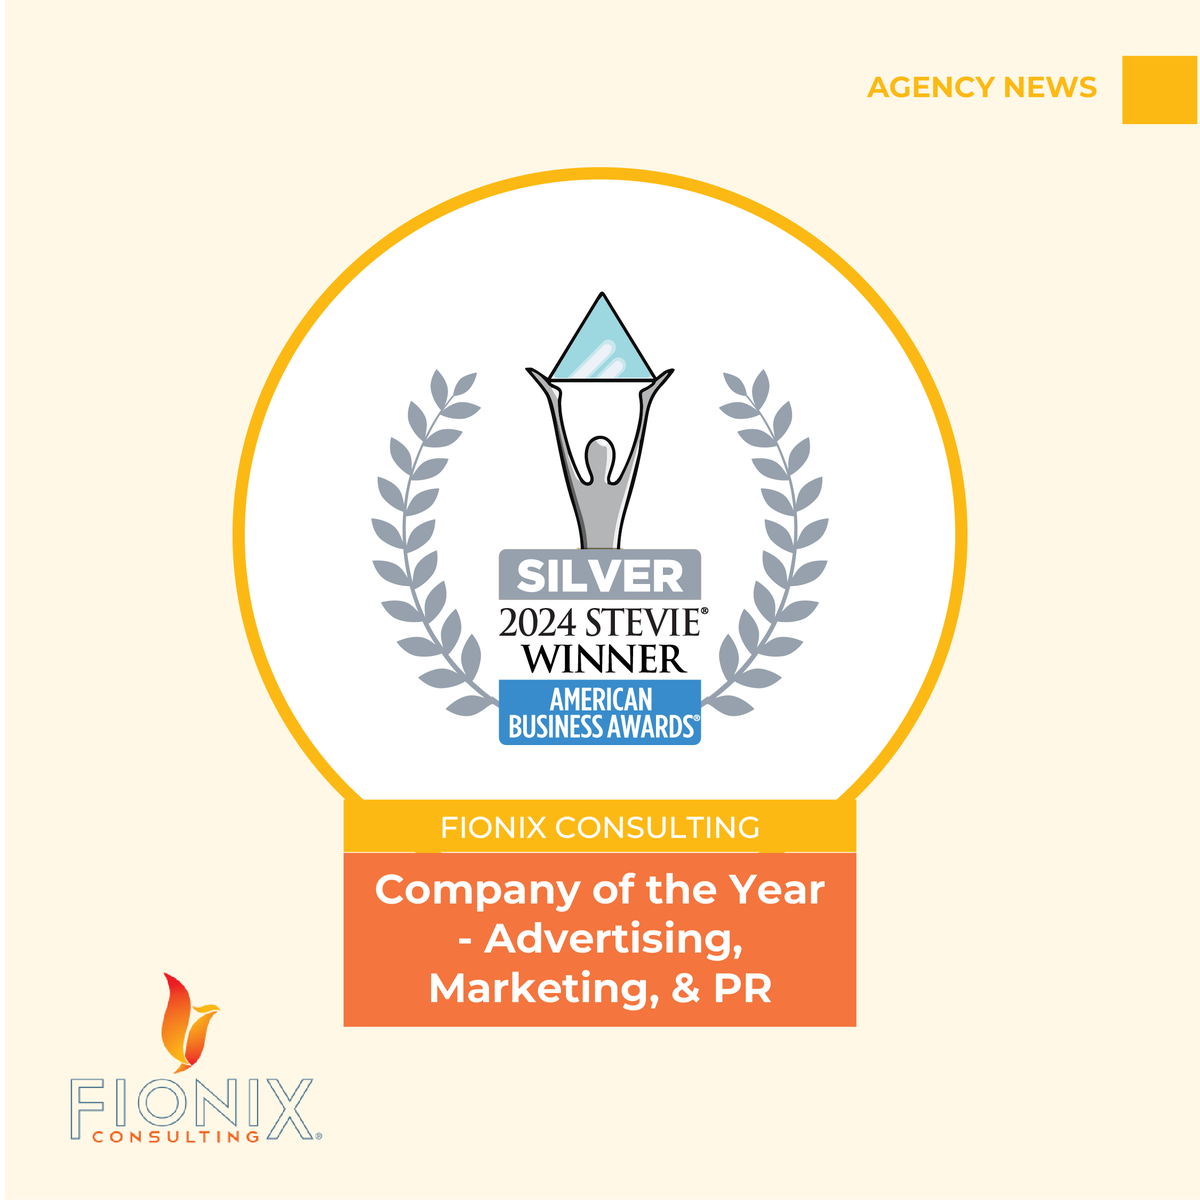 🌟Another win for the team!🌟 We've won a SILVER @TheStevieAwards American Business Award as Company of the Year in #Advertising, #Marketing & #PublicRelations - reflecting our commitment to excellence & innovation in #strategiccommunications. #TheStevieAwards #StevieWinner2024